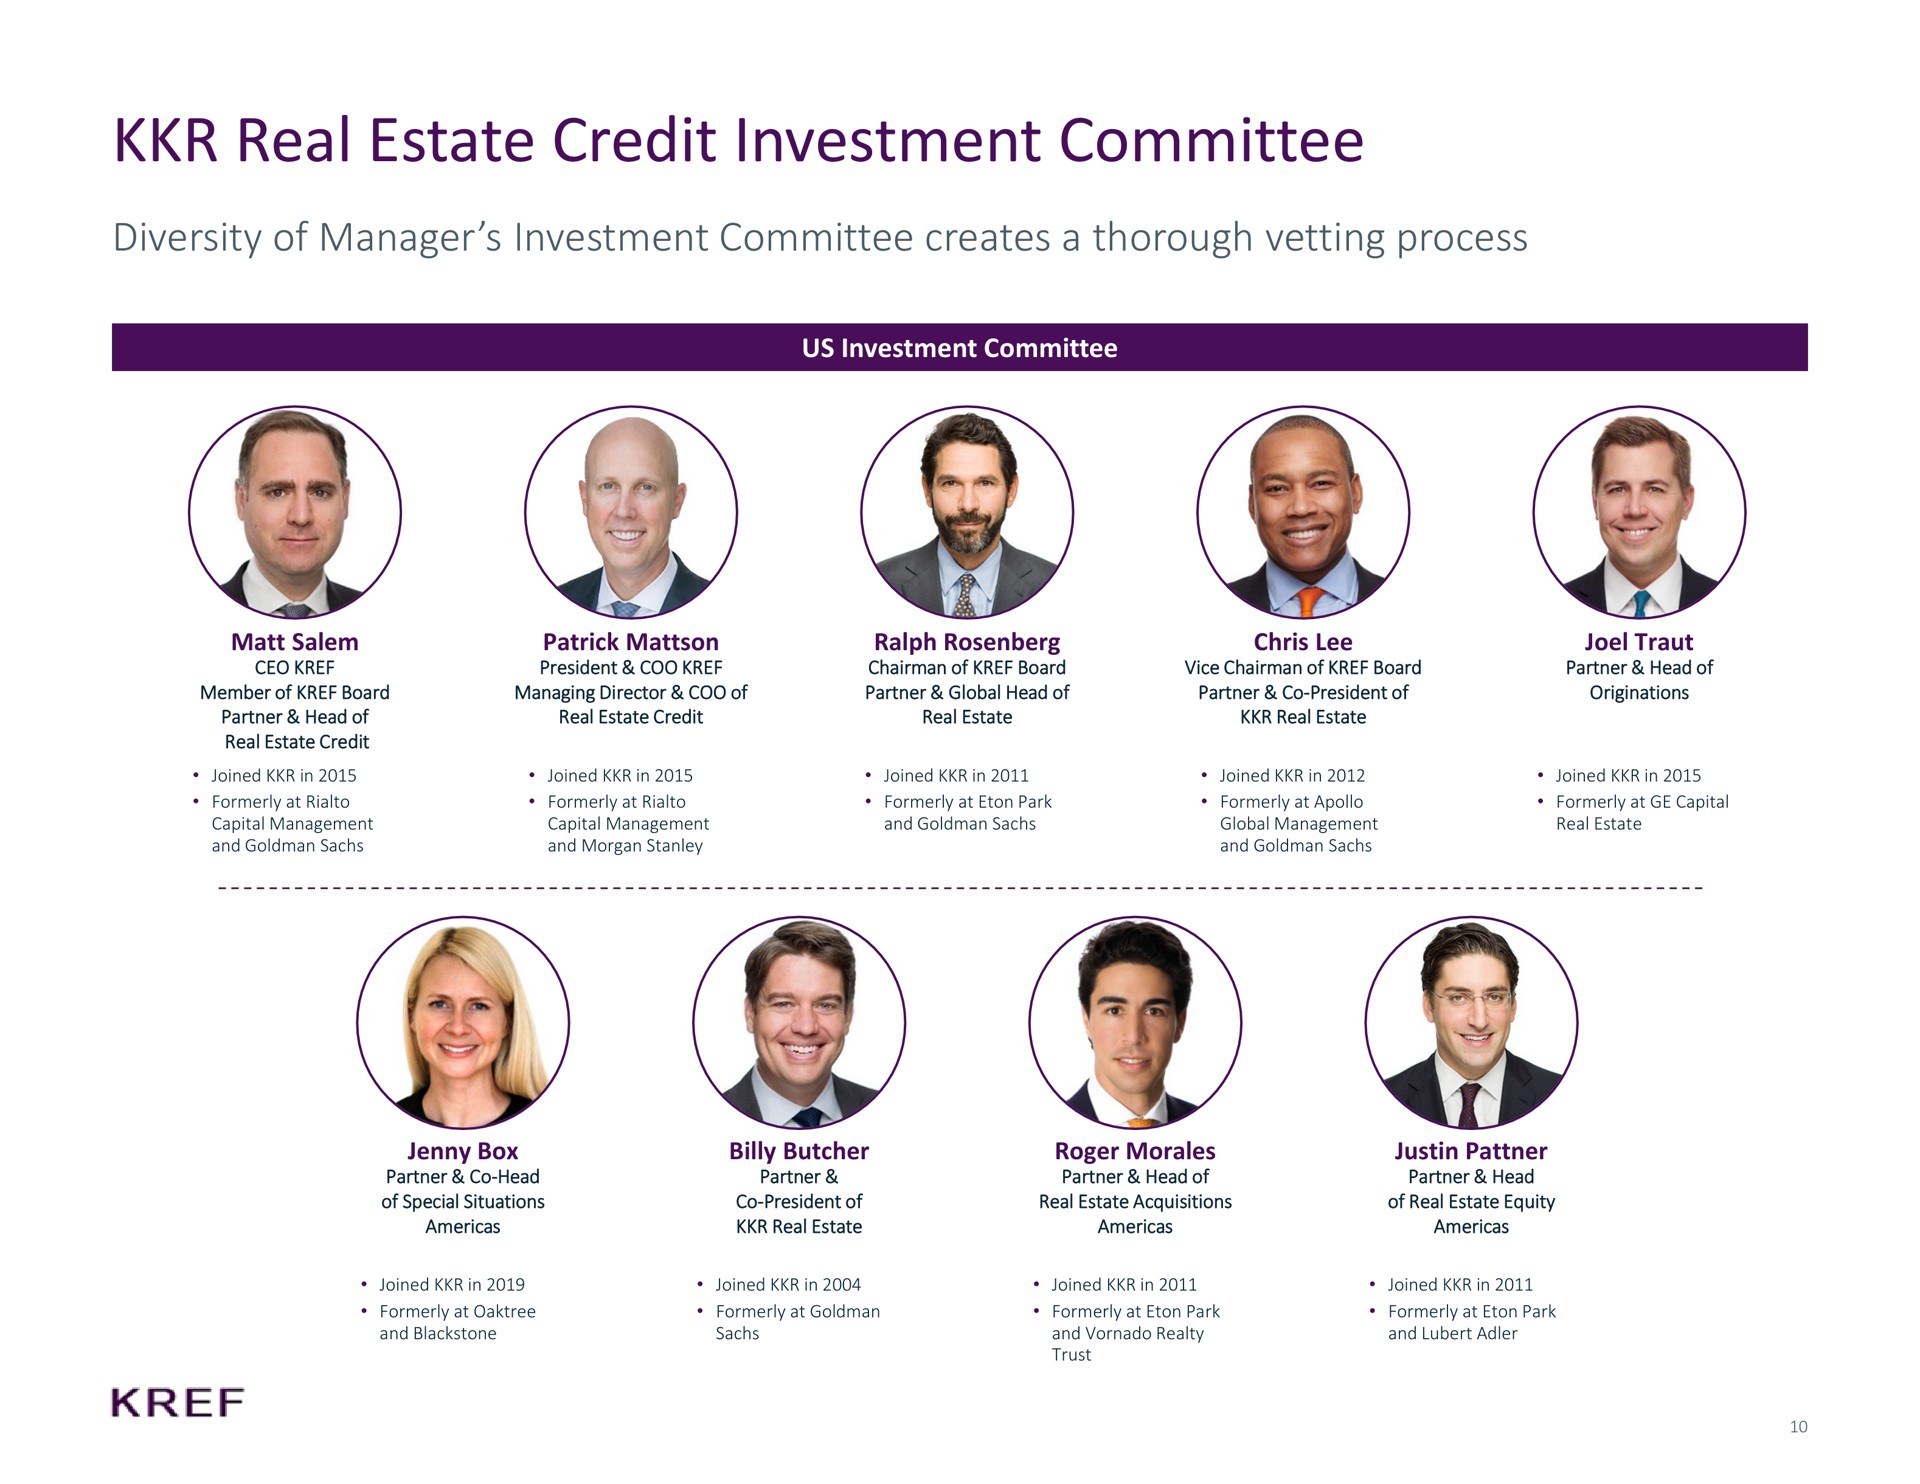 real estate credit investment committee diversity of manager investment committee creates a thorough vetting process | KKR Real Estate Finance Trust